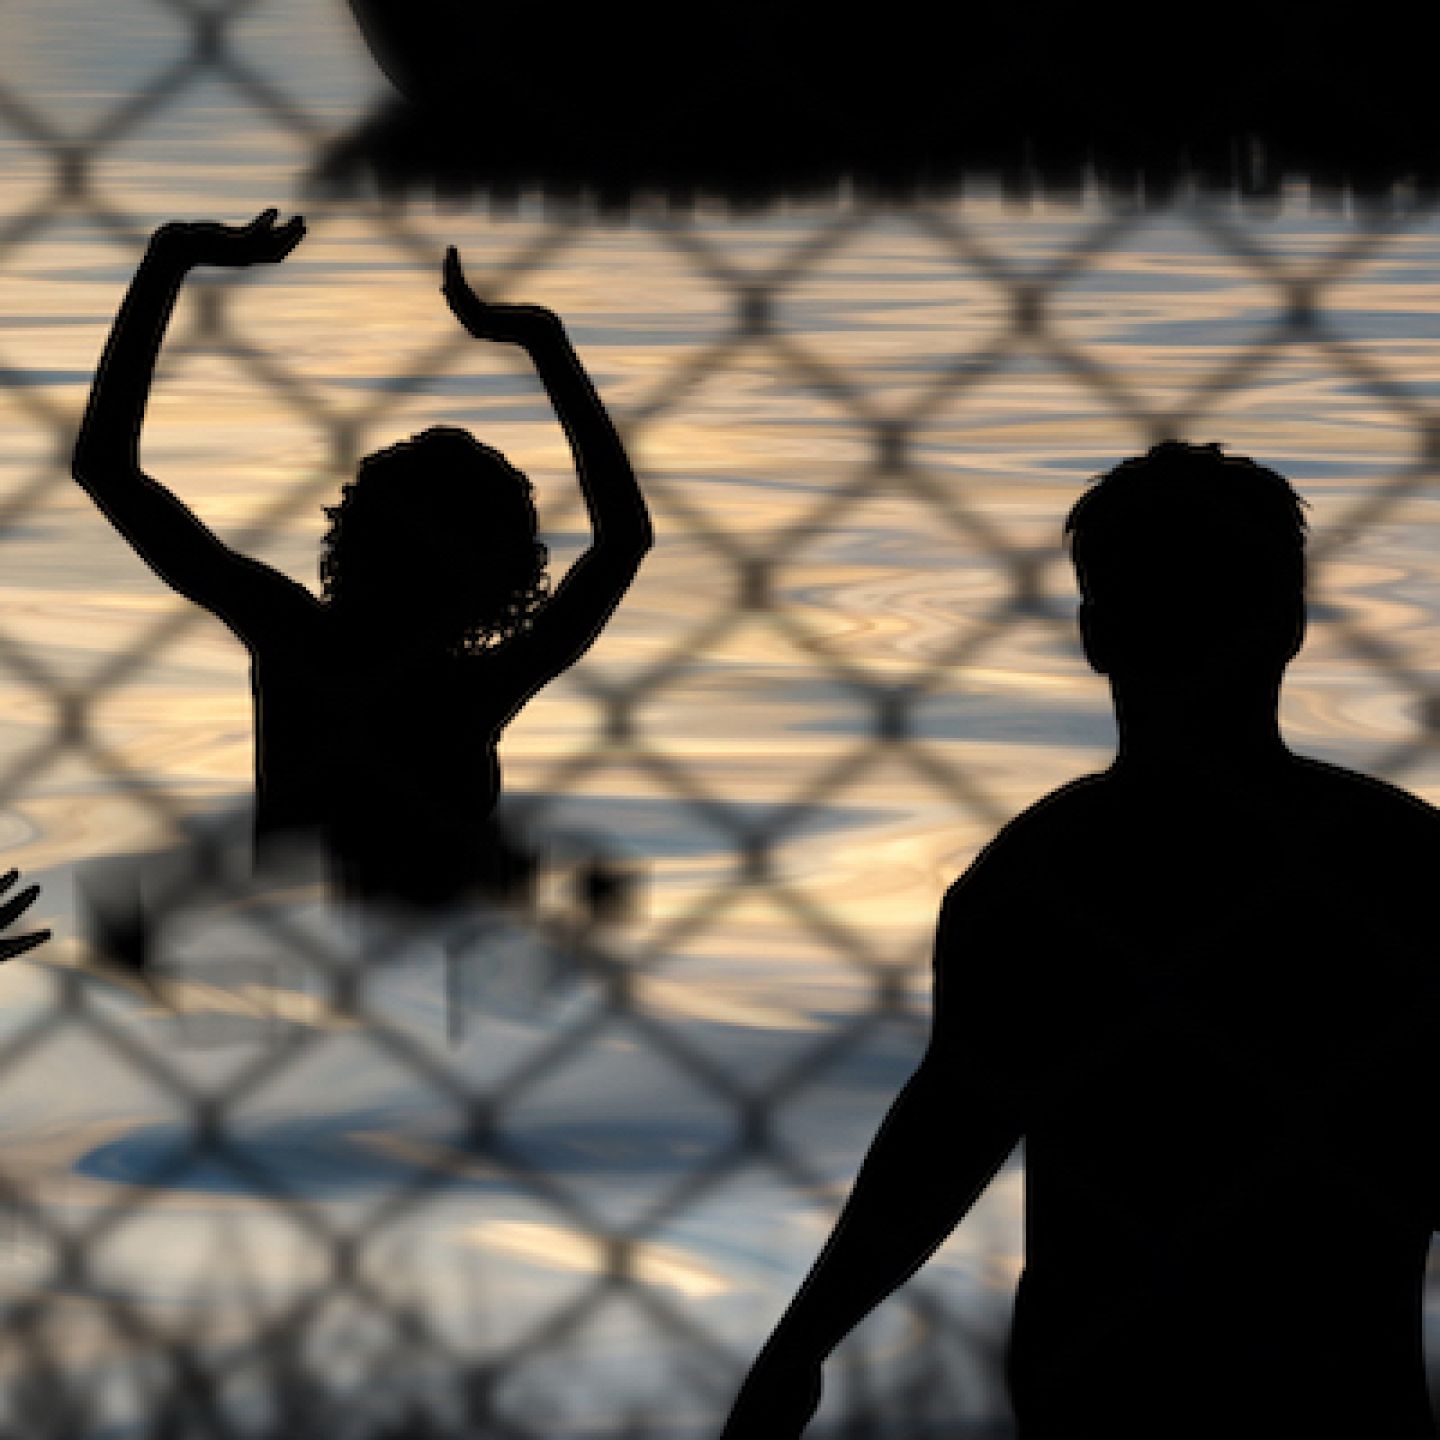 Refugees swim to shore against the backdrop of a chain wire fence